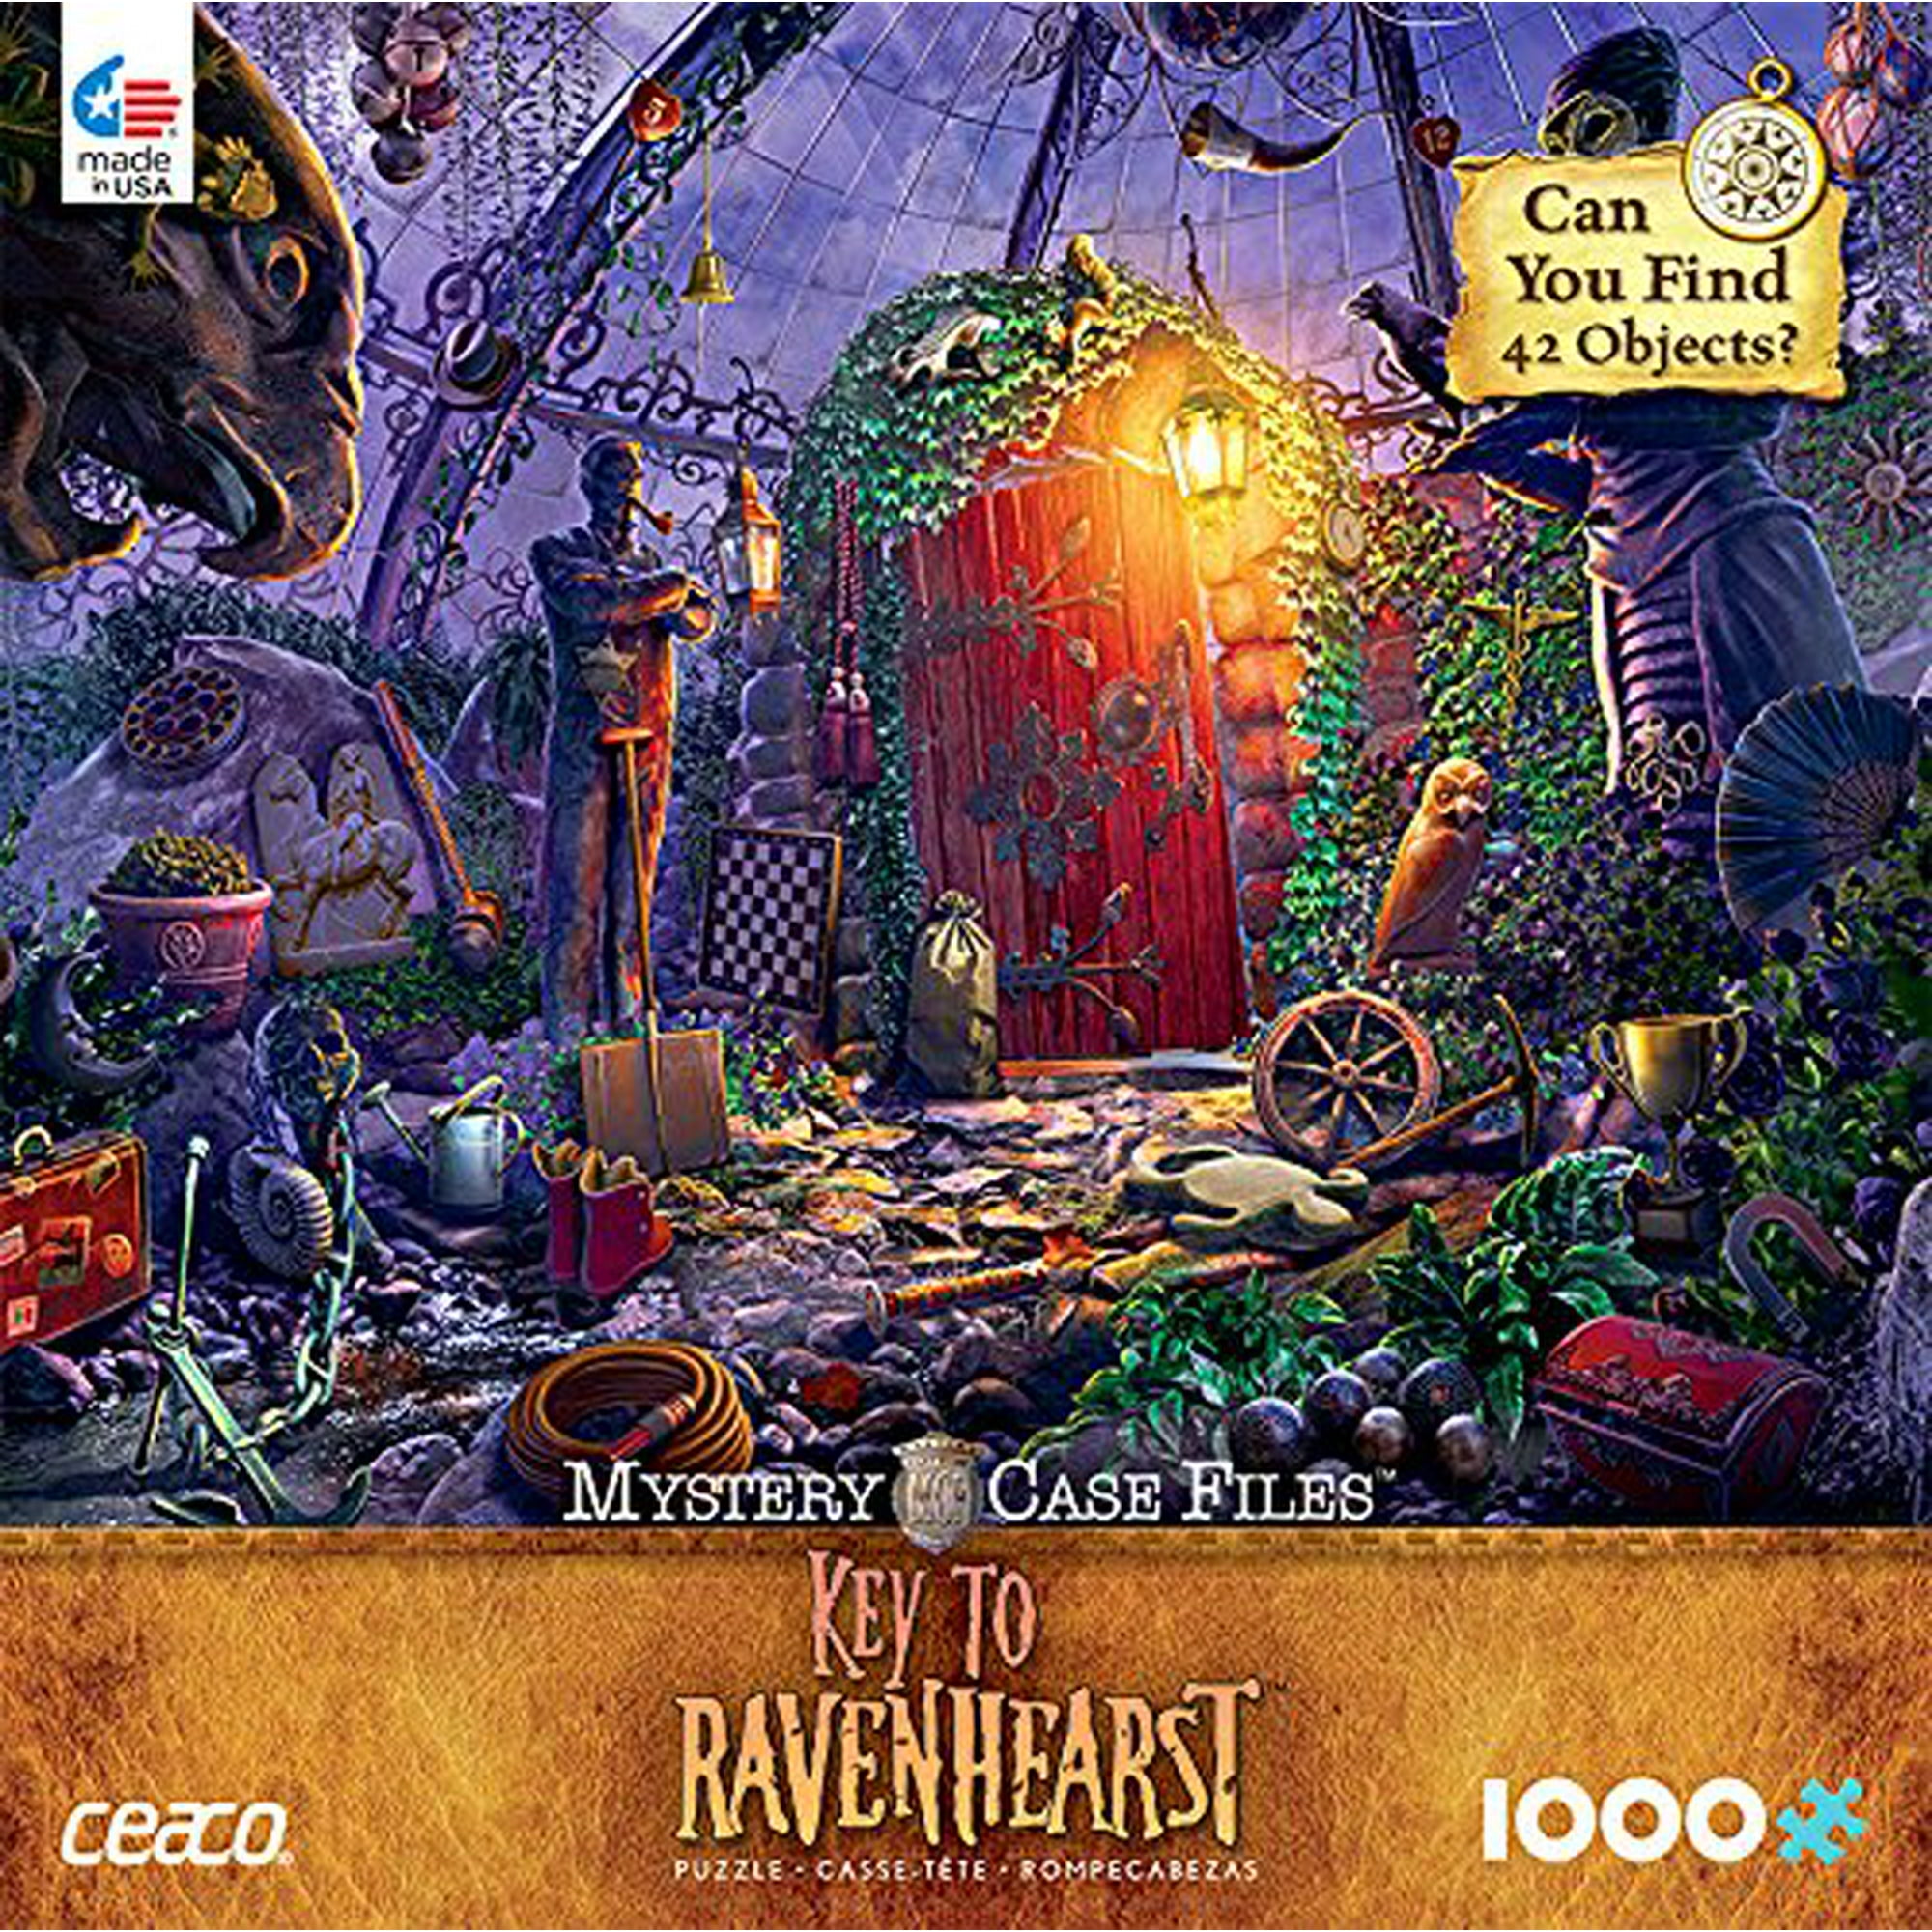 Ceaco Mystery Case Files Ravenhearst Collection Knowledge Repository Puzzle 3369-6 1000 Piece